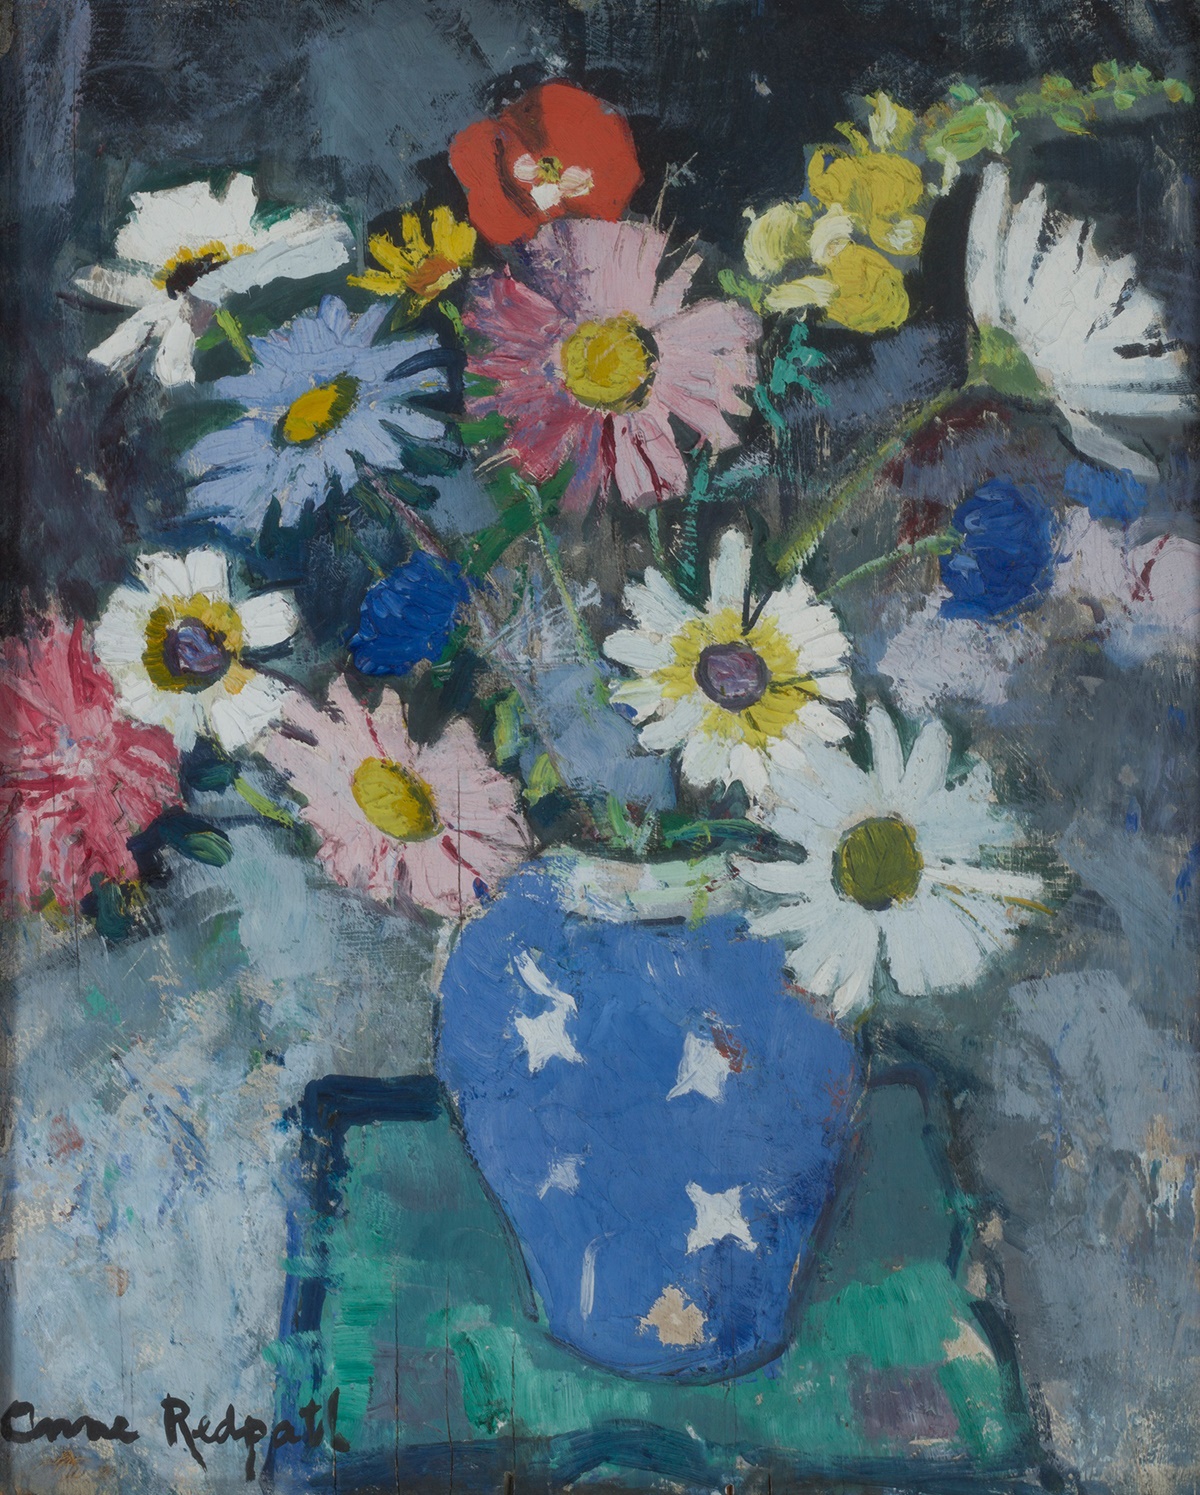 ANNE REDPATH O.B.E., R.S.A., A.R.A., L.L.D., A.R.W.S., R.O.I., R.B.A. (SCOTTISH 1895-1965) | MARGUERITES IN A BLUE AND WHITE VASE | £15,000 - £20,000 + fees